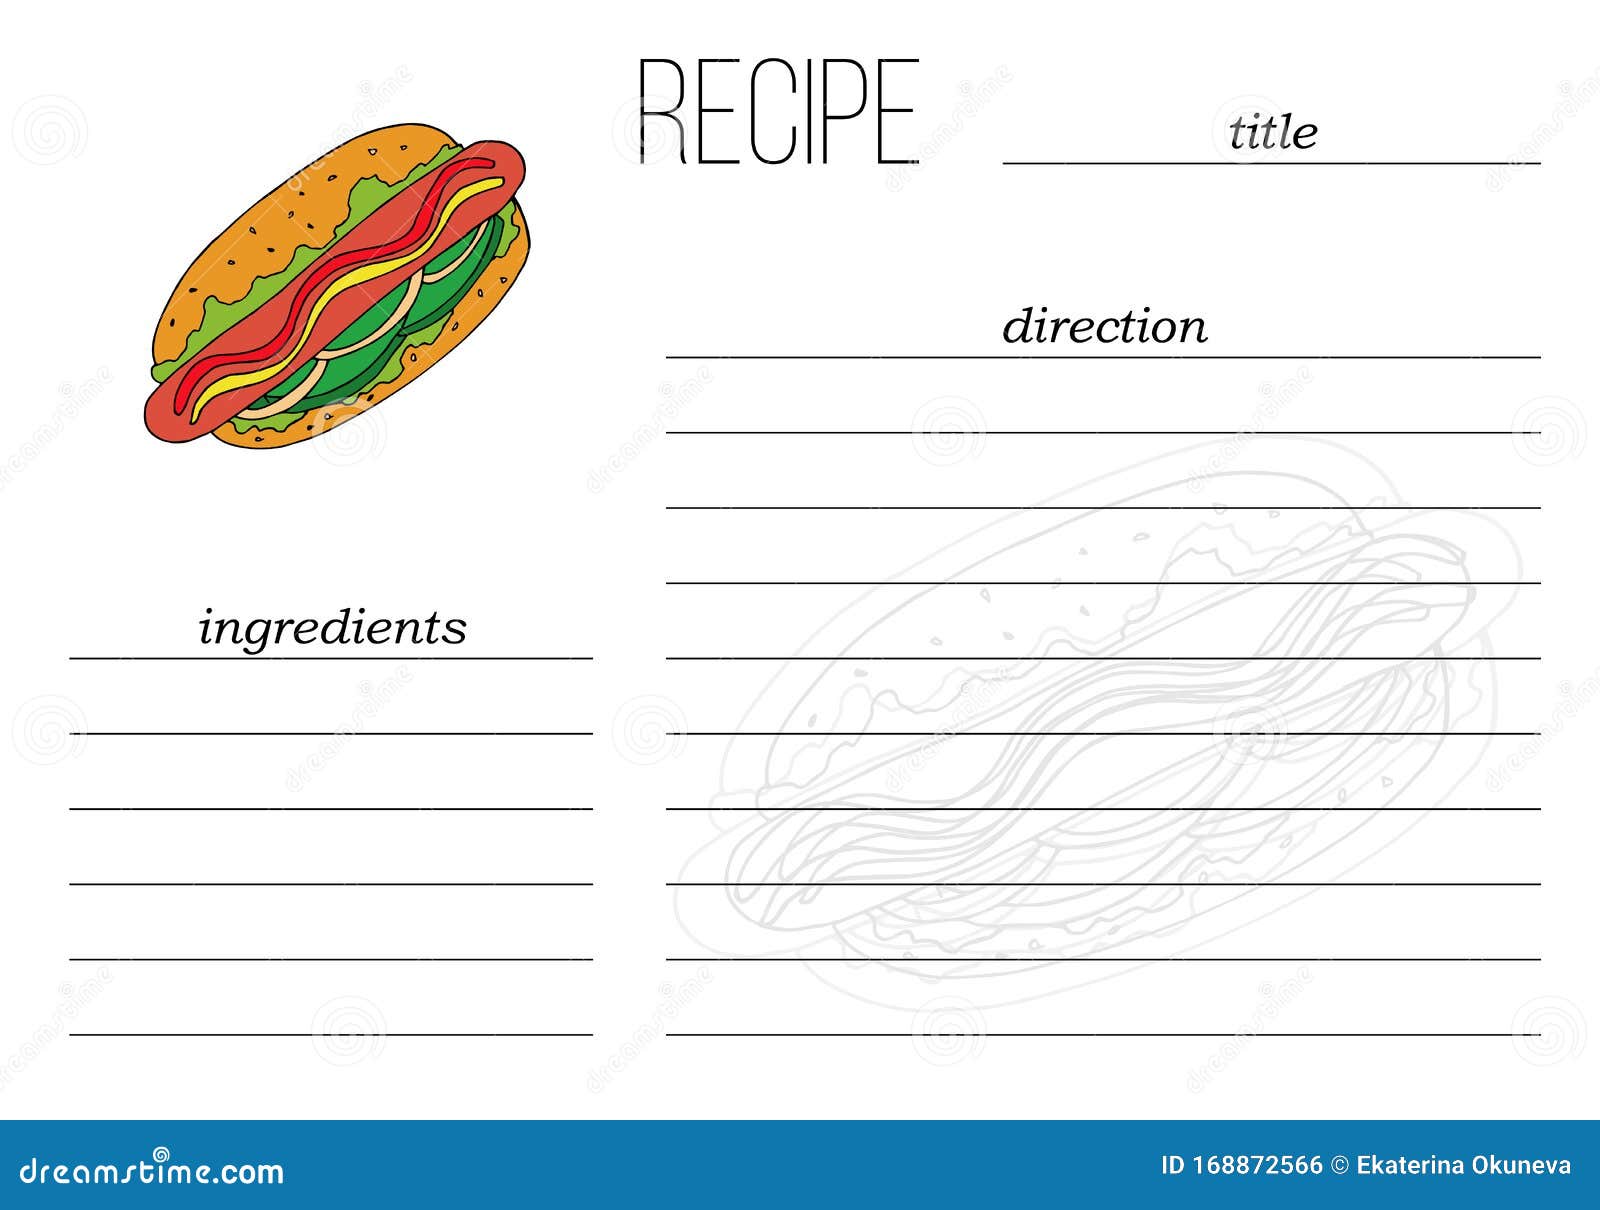 https://thumbs.dreamstime.com/z/vector-simple-recipe-card-template-fast-food-illustration-cartoon-style-simple-recipe-card-template-fast-food-168872566.jpg